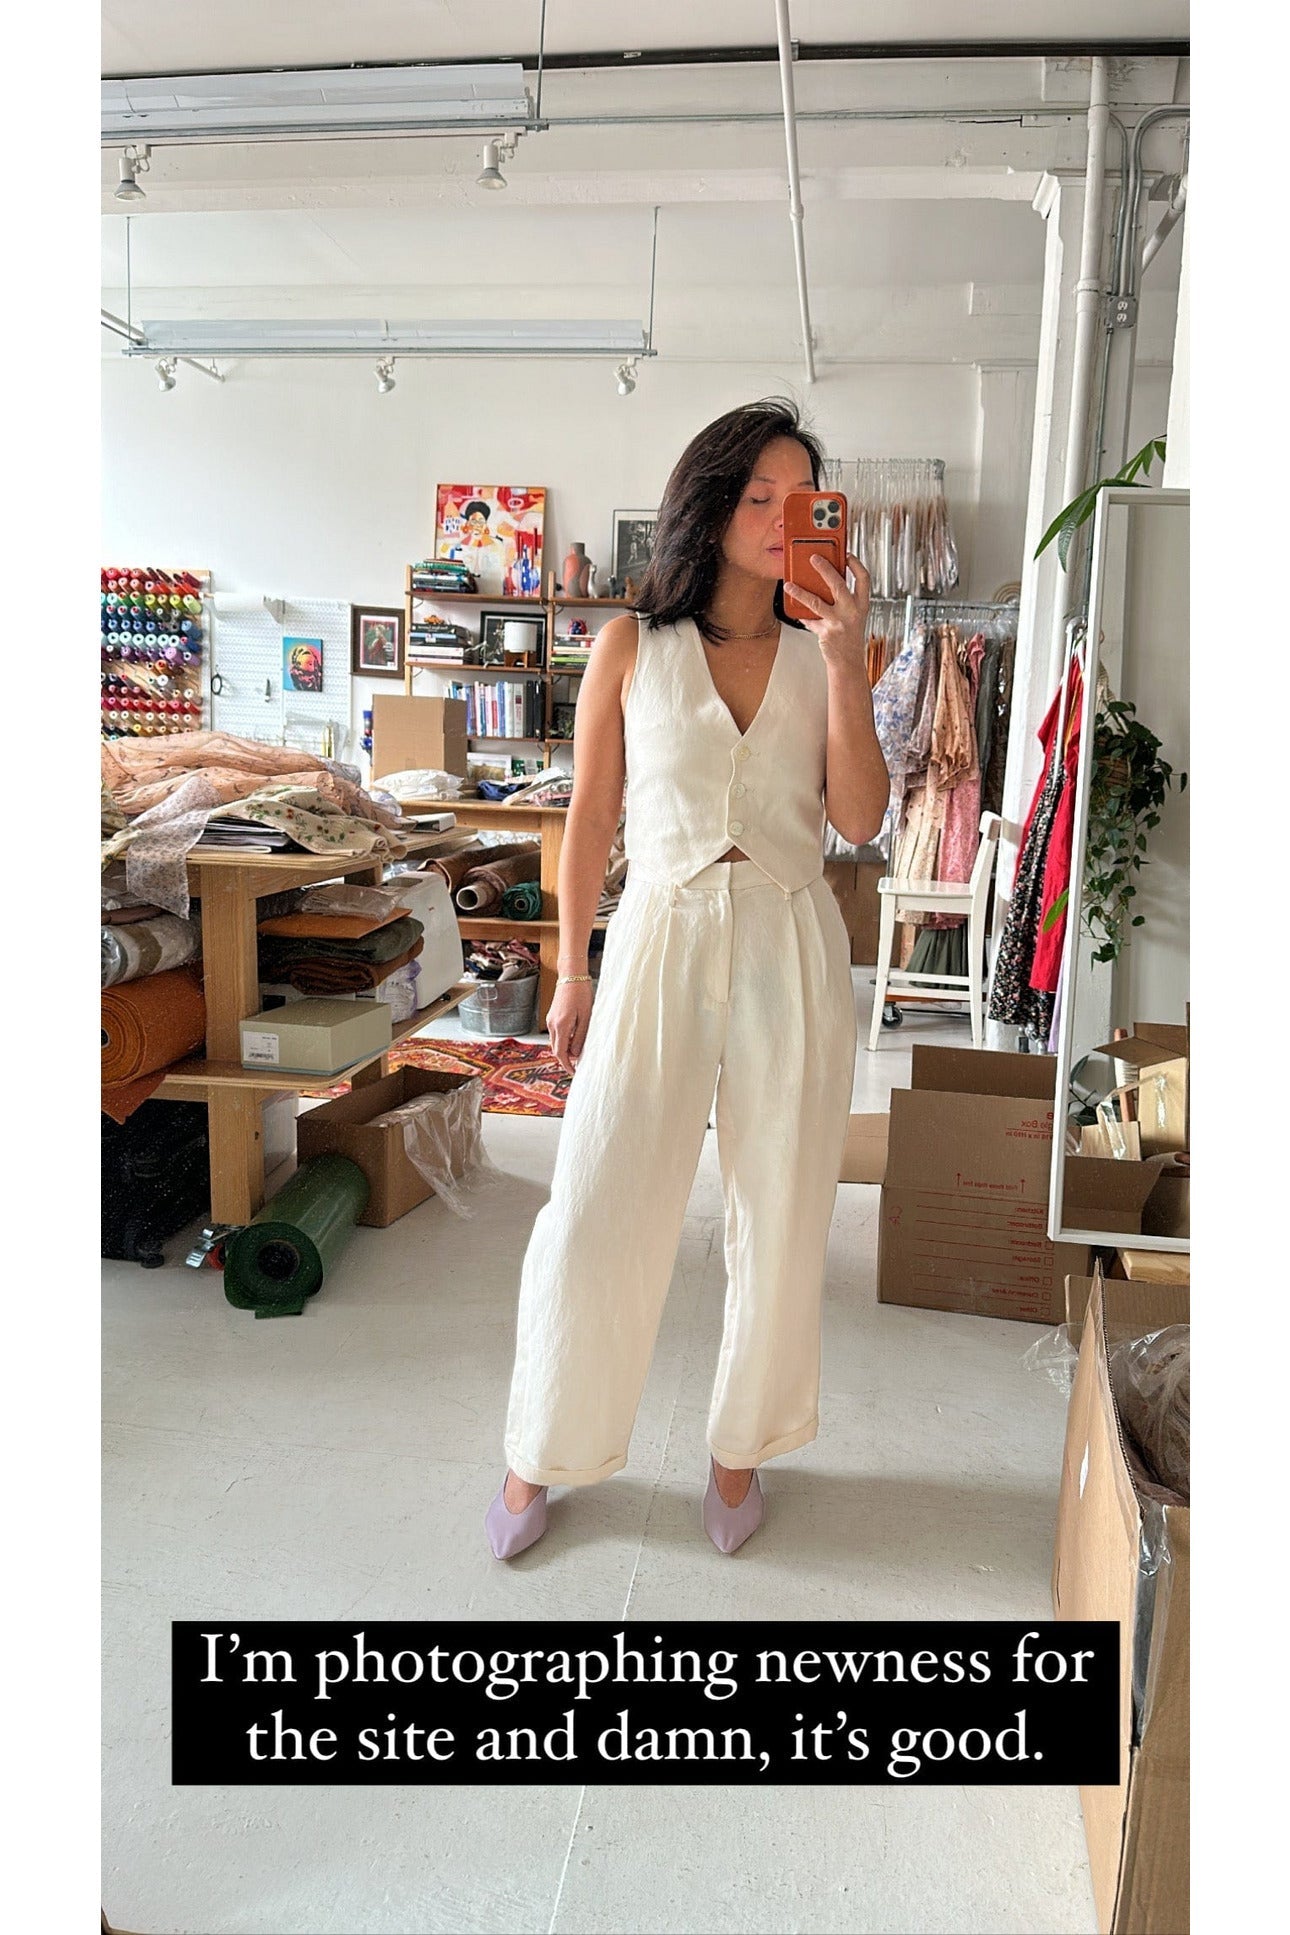 Charlie Pant in Linen Blend Pants CHRISTINE ALCALAY   